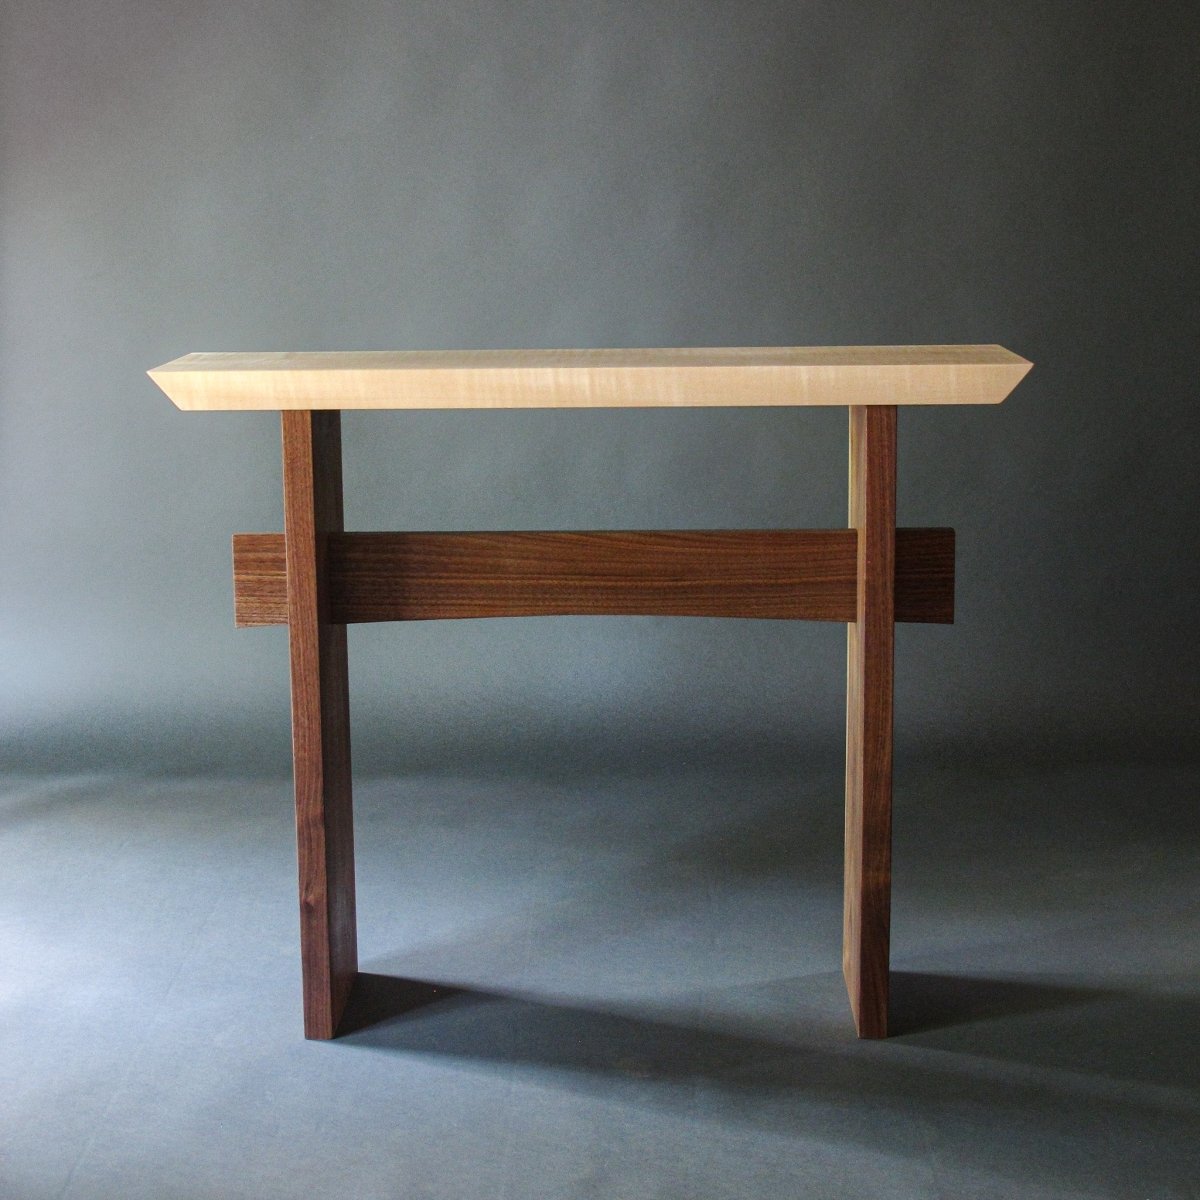 a modern wood furniture design by Mokuzai Furniture- The Statement Hall Table